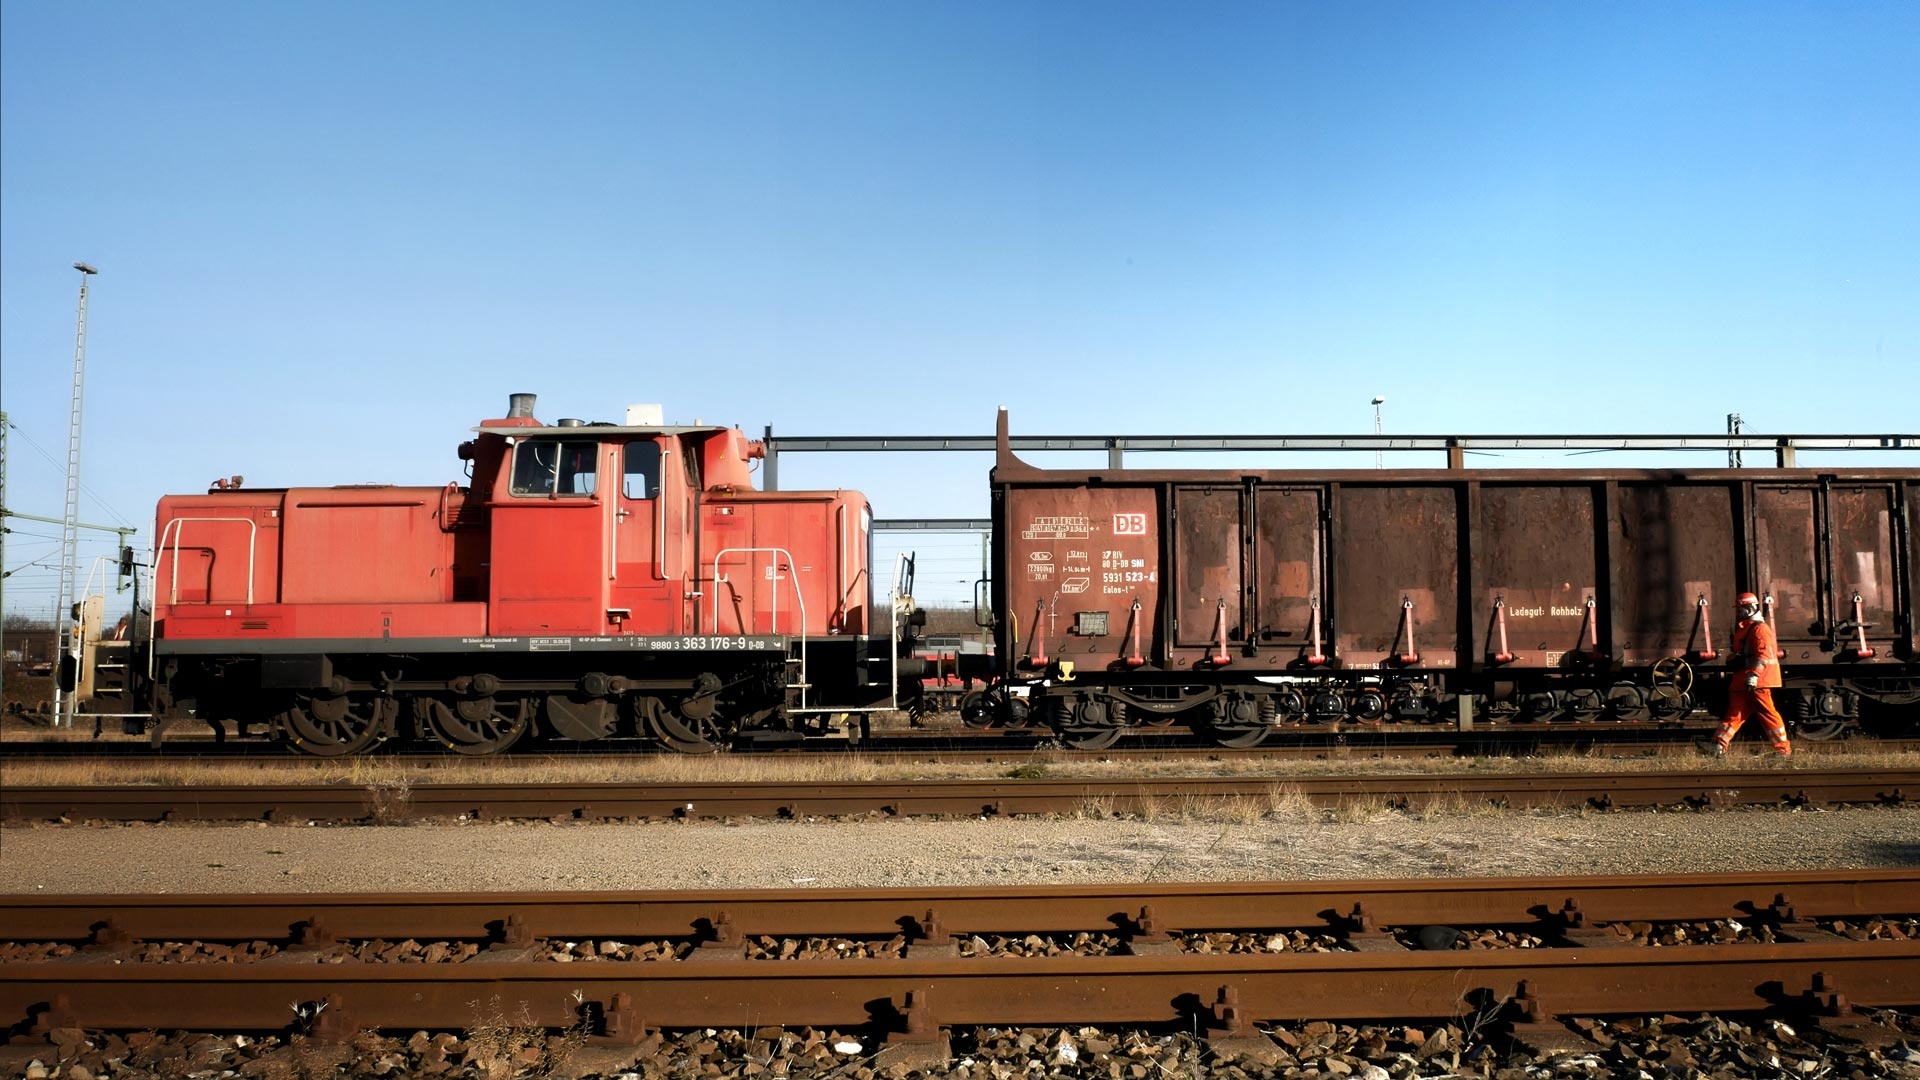 Freight-train-locomotive-with-a-car-and-a-shunting-worker-infront-of-the-train